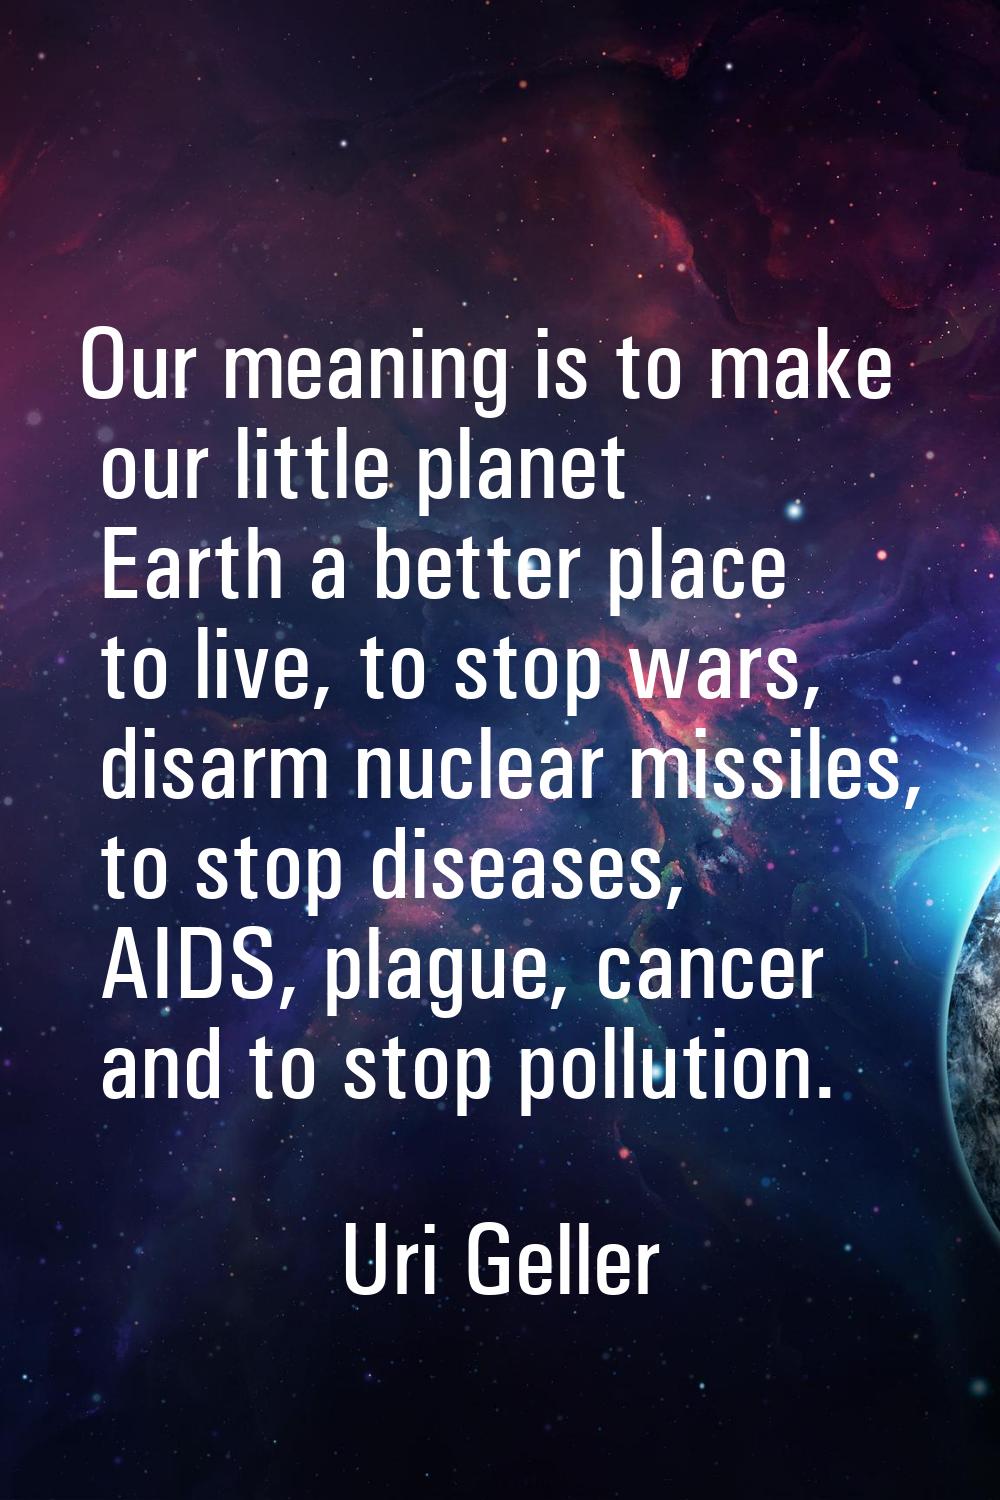 Our meaning is to make our little planet Earth a better place to live, to stop wars, disarm nuclear